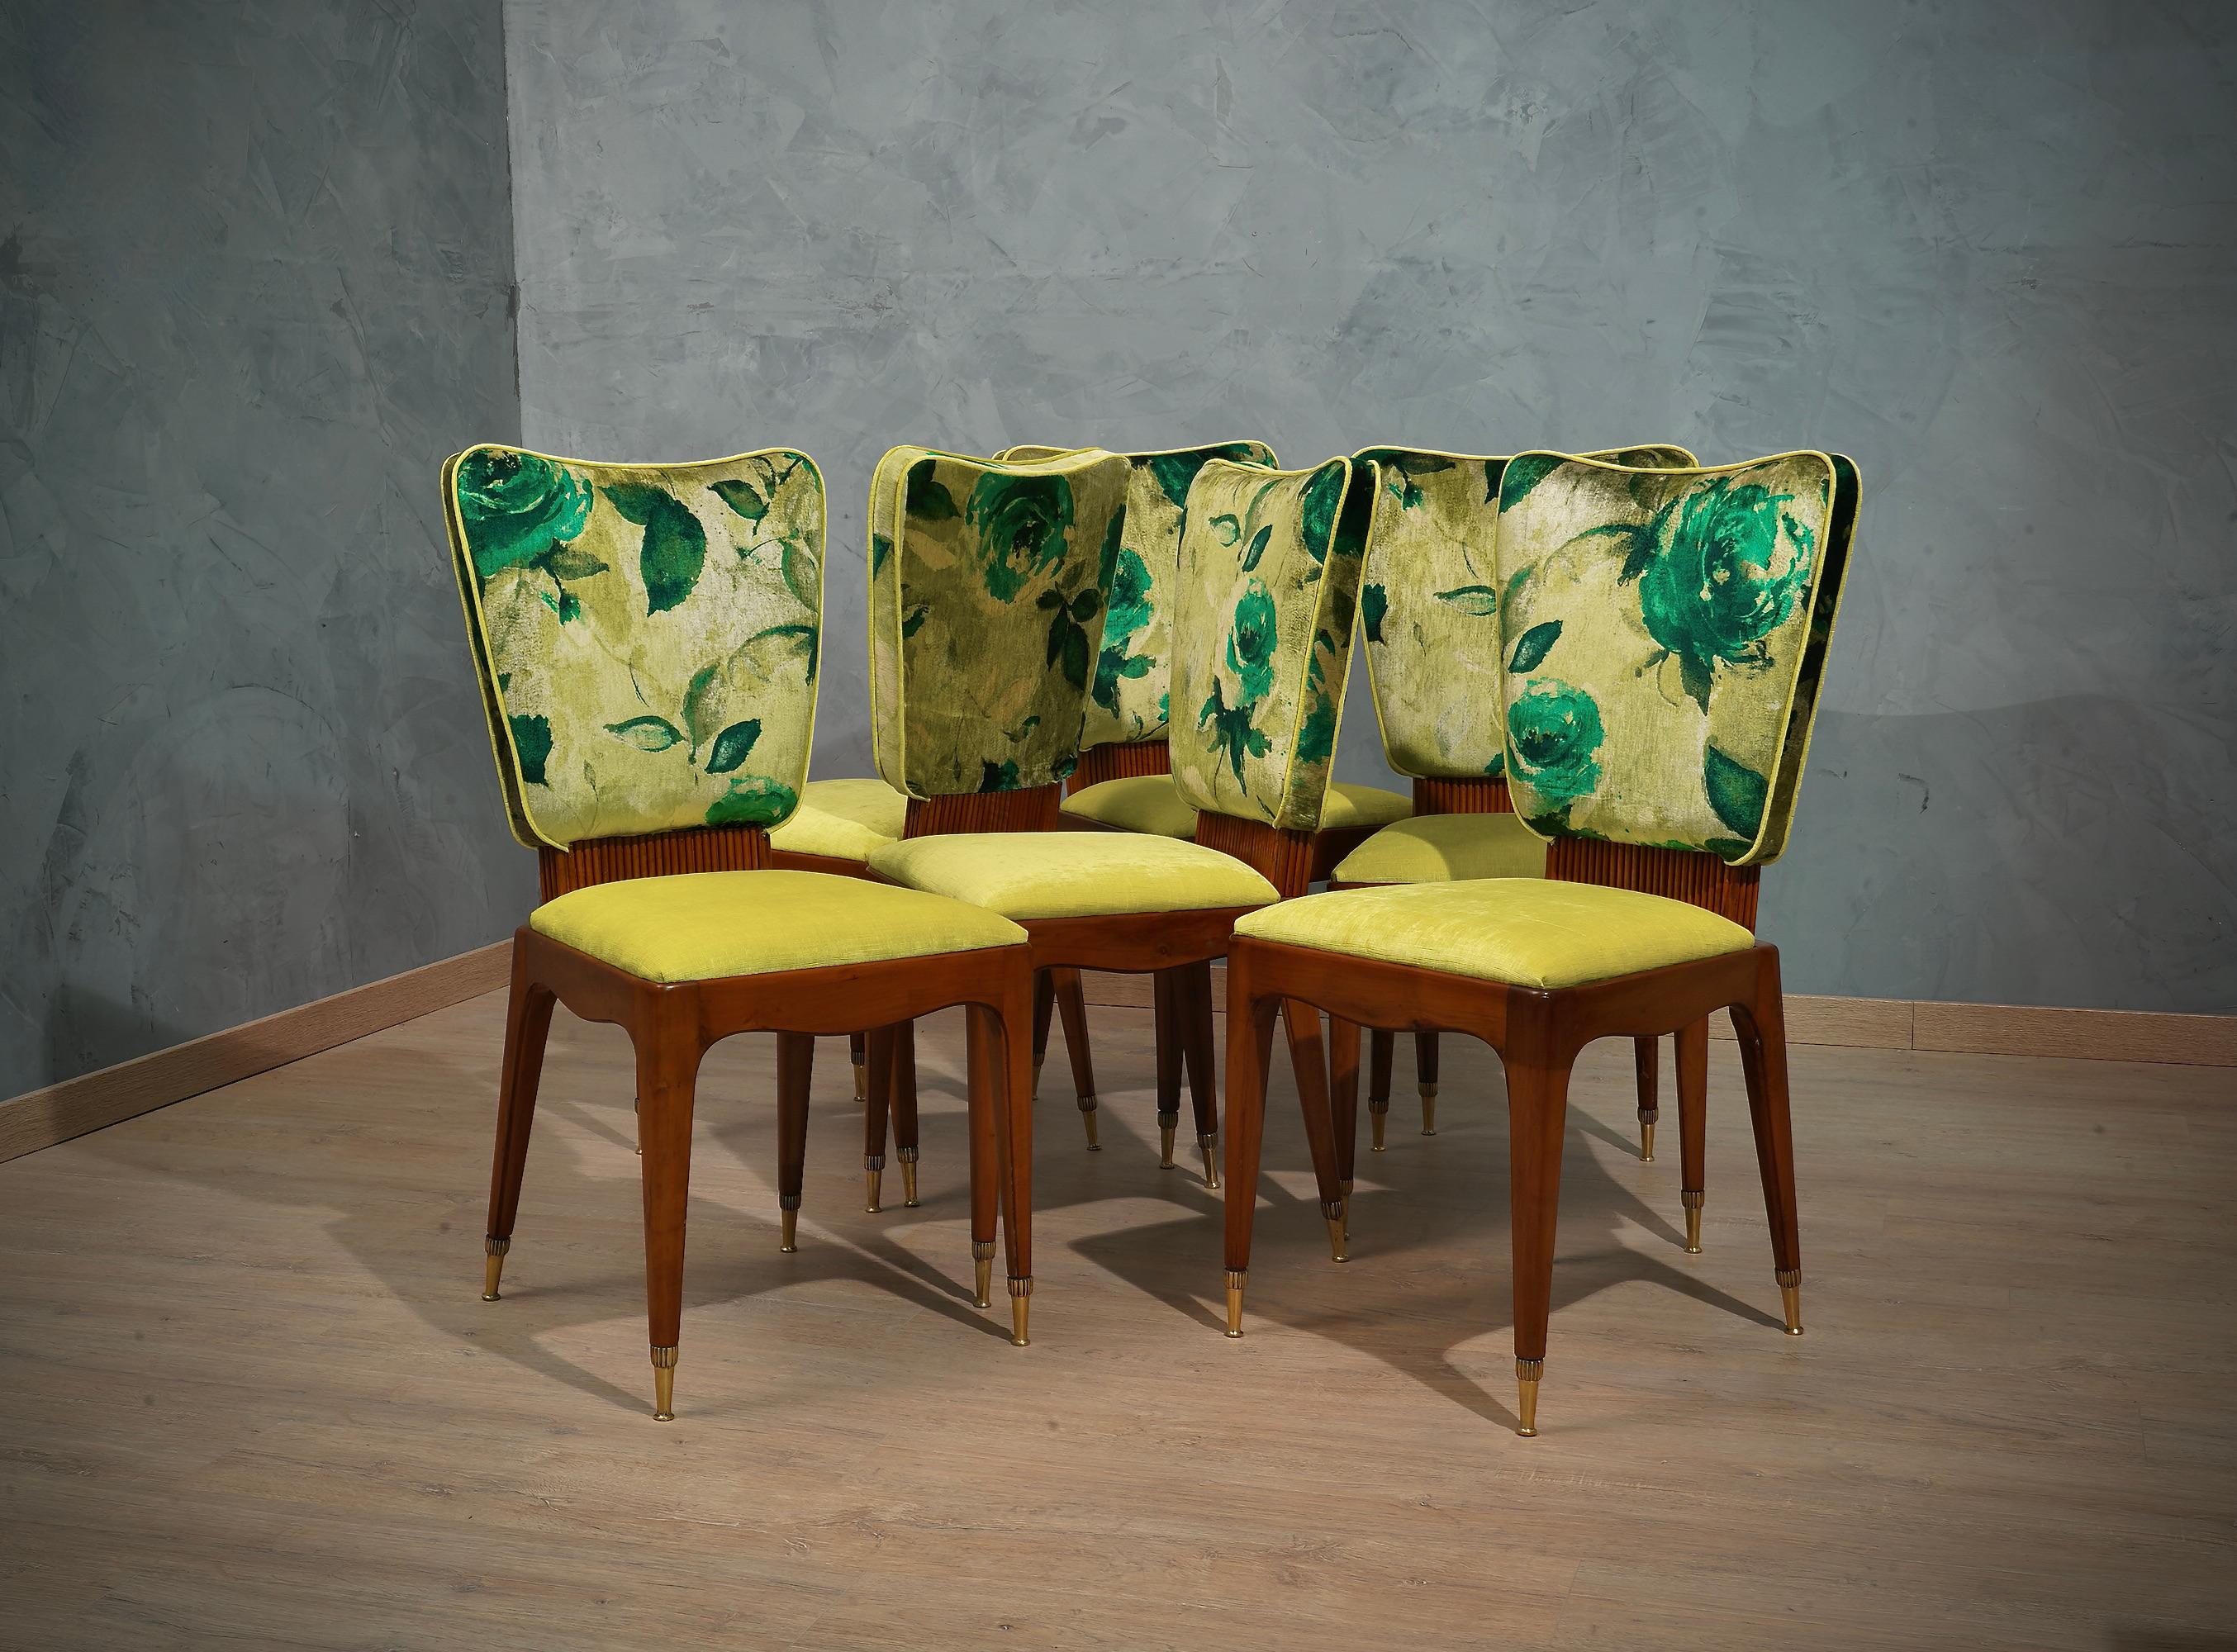 Osvaldo Borsani Attributed Cherry Wood and Floral Fabric Six Chairs, 1950 For Sale 6